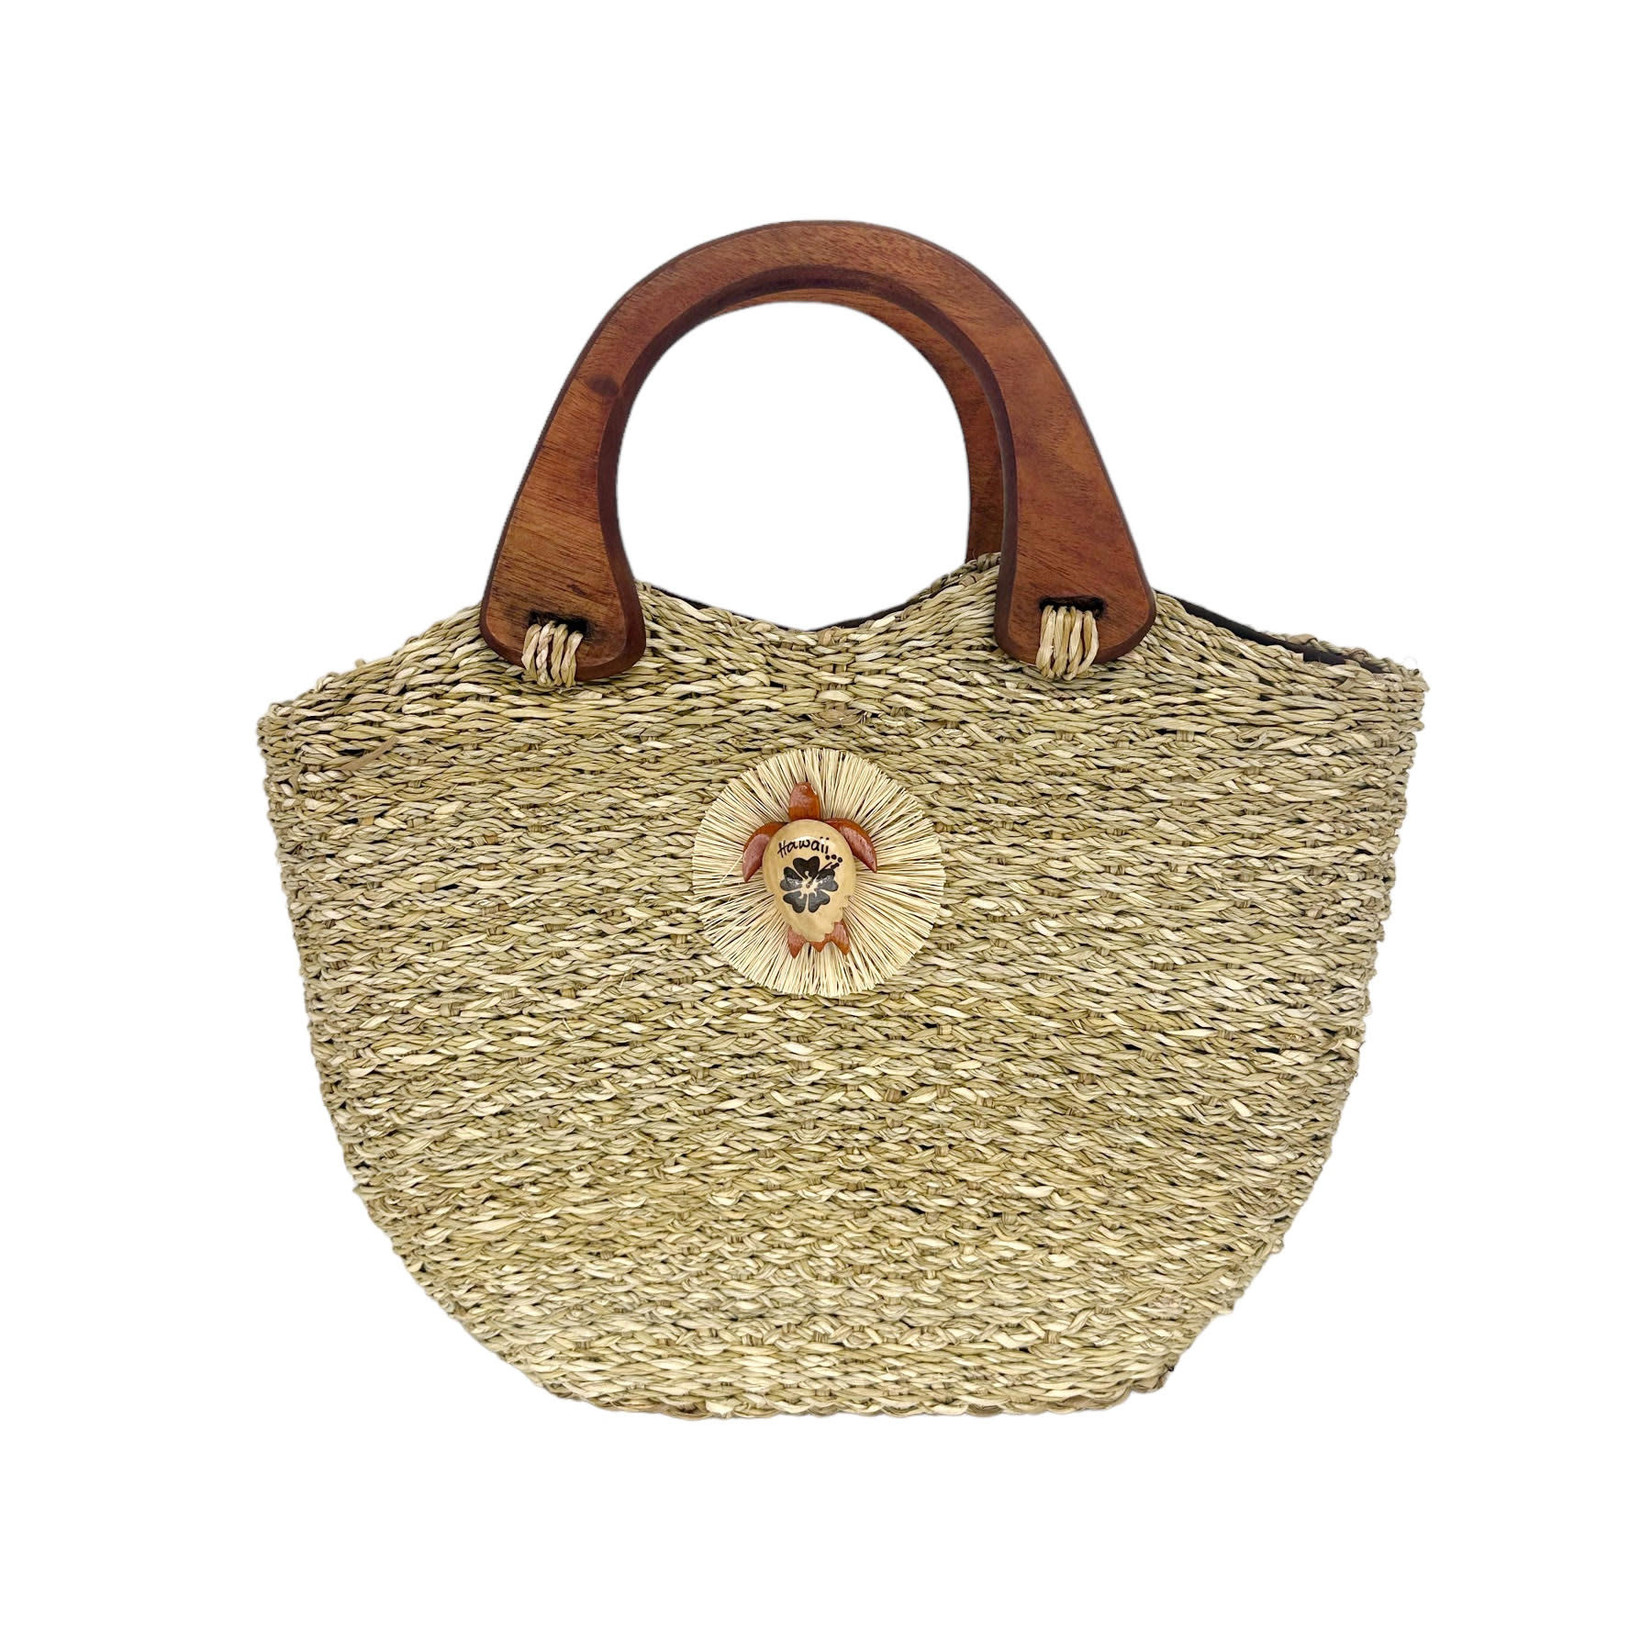 Woven Lauhala Bag with Wood Handles Pawale